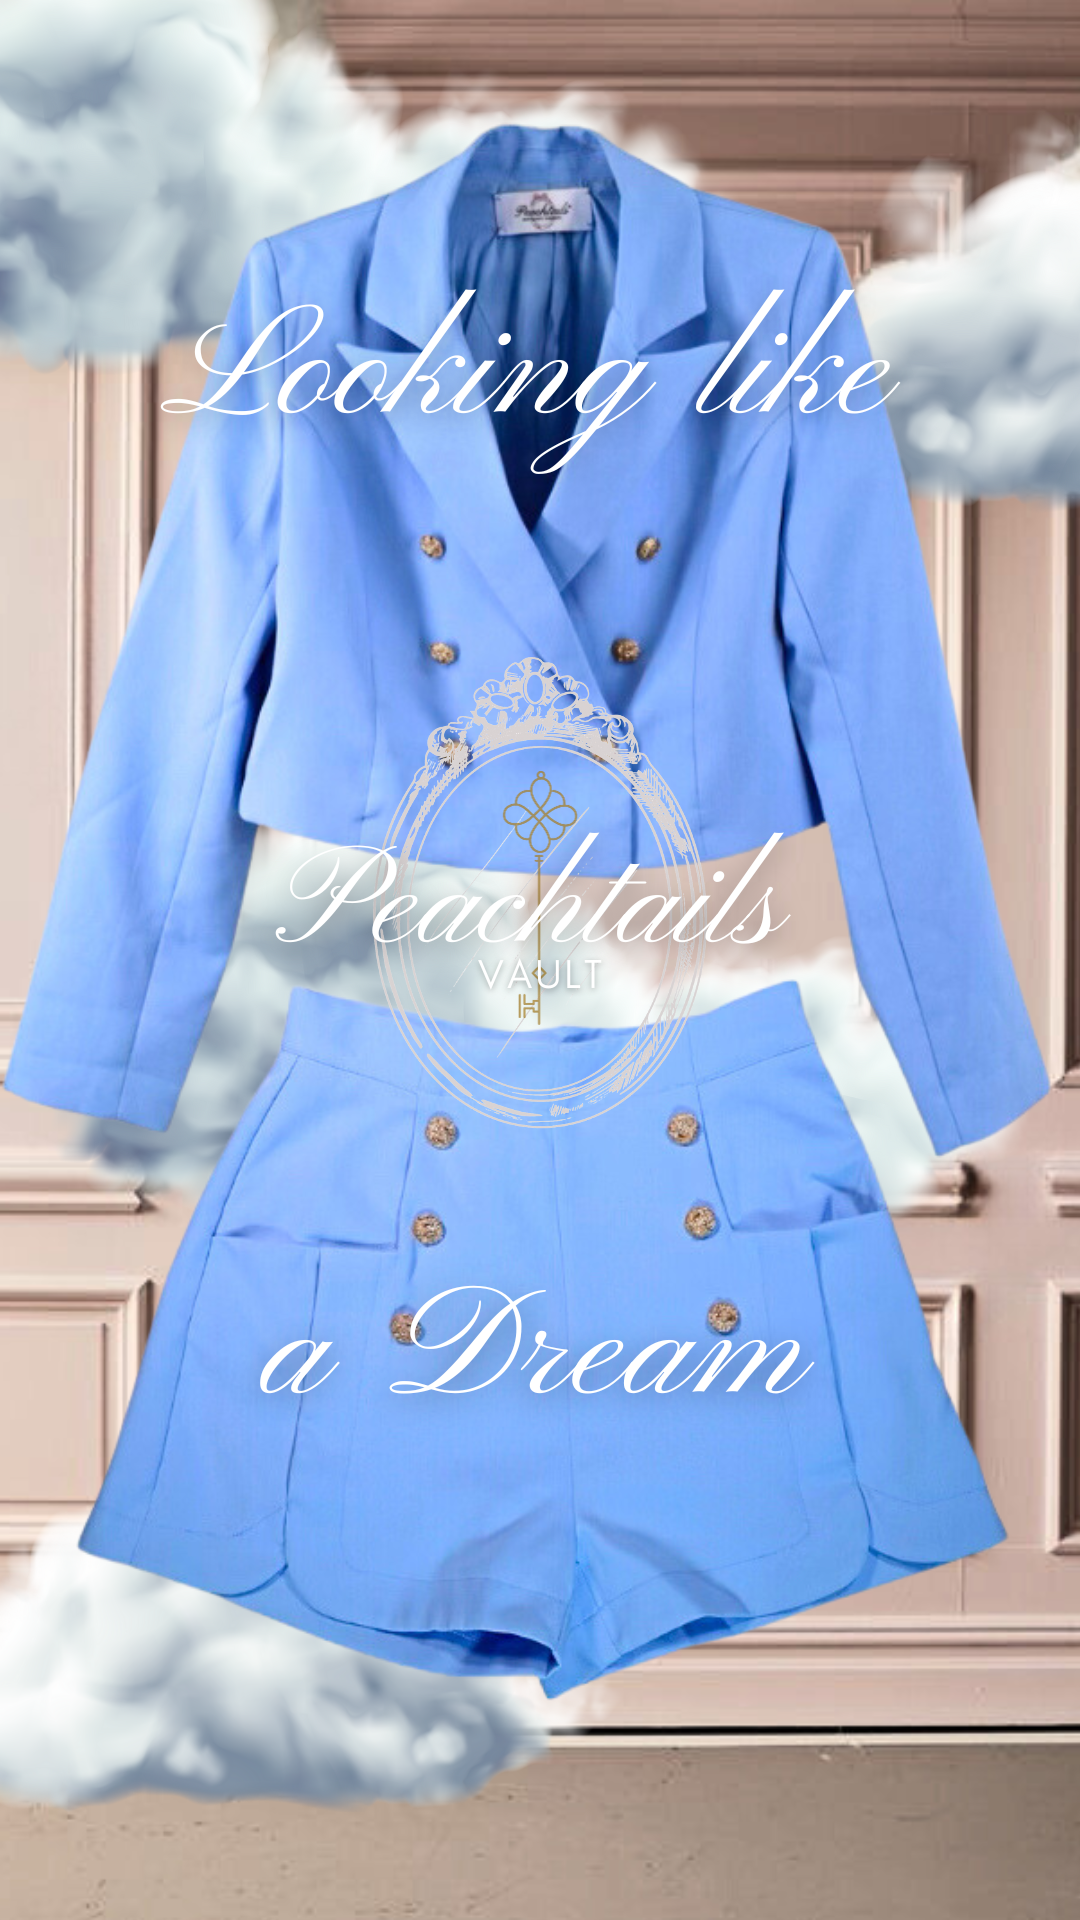 The image showcases a vibrant blue women's blazer and matching shorts from the "Peachtails VAULT" collection. The ensemble is superimposed on a soft, dreamy background with clouds and a classic architecture motif. Above the outfit, in a flowing script, it reads "Looking like," and below, "a Dream," framing the clothing in the center. The Peachtails logo is delicately placed over the blazer, suggesting a blend of style and fantasy in the design.